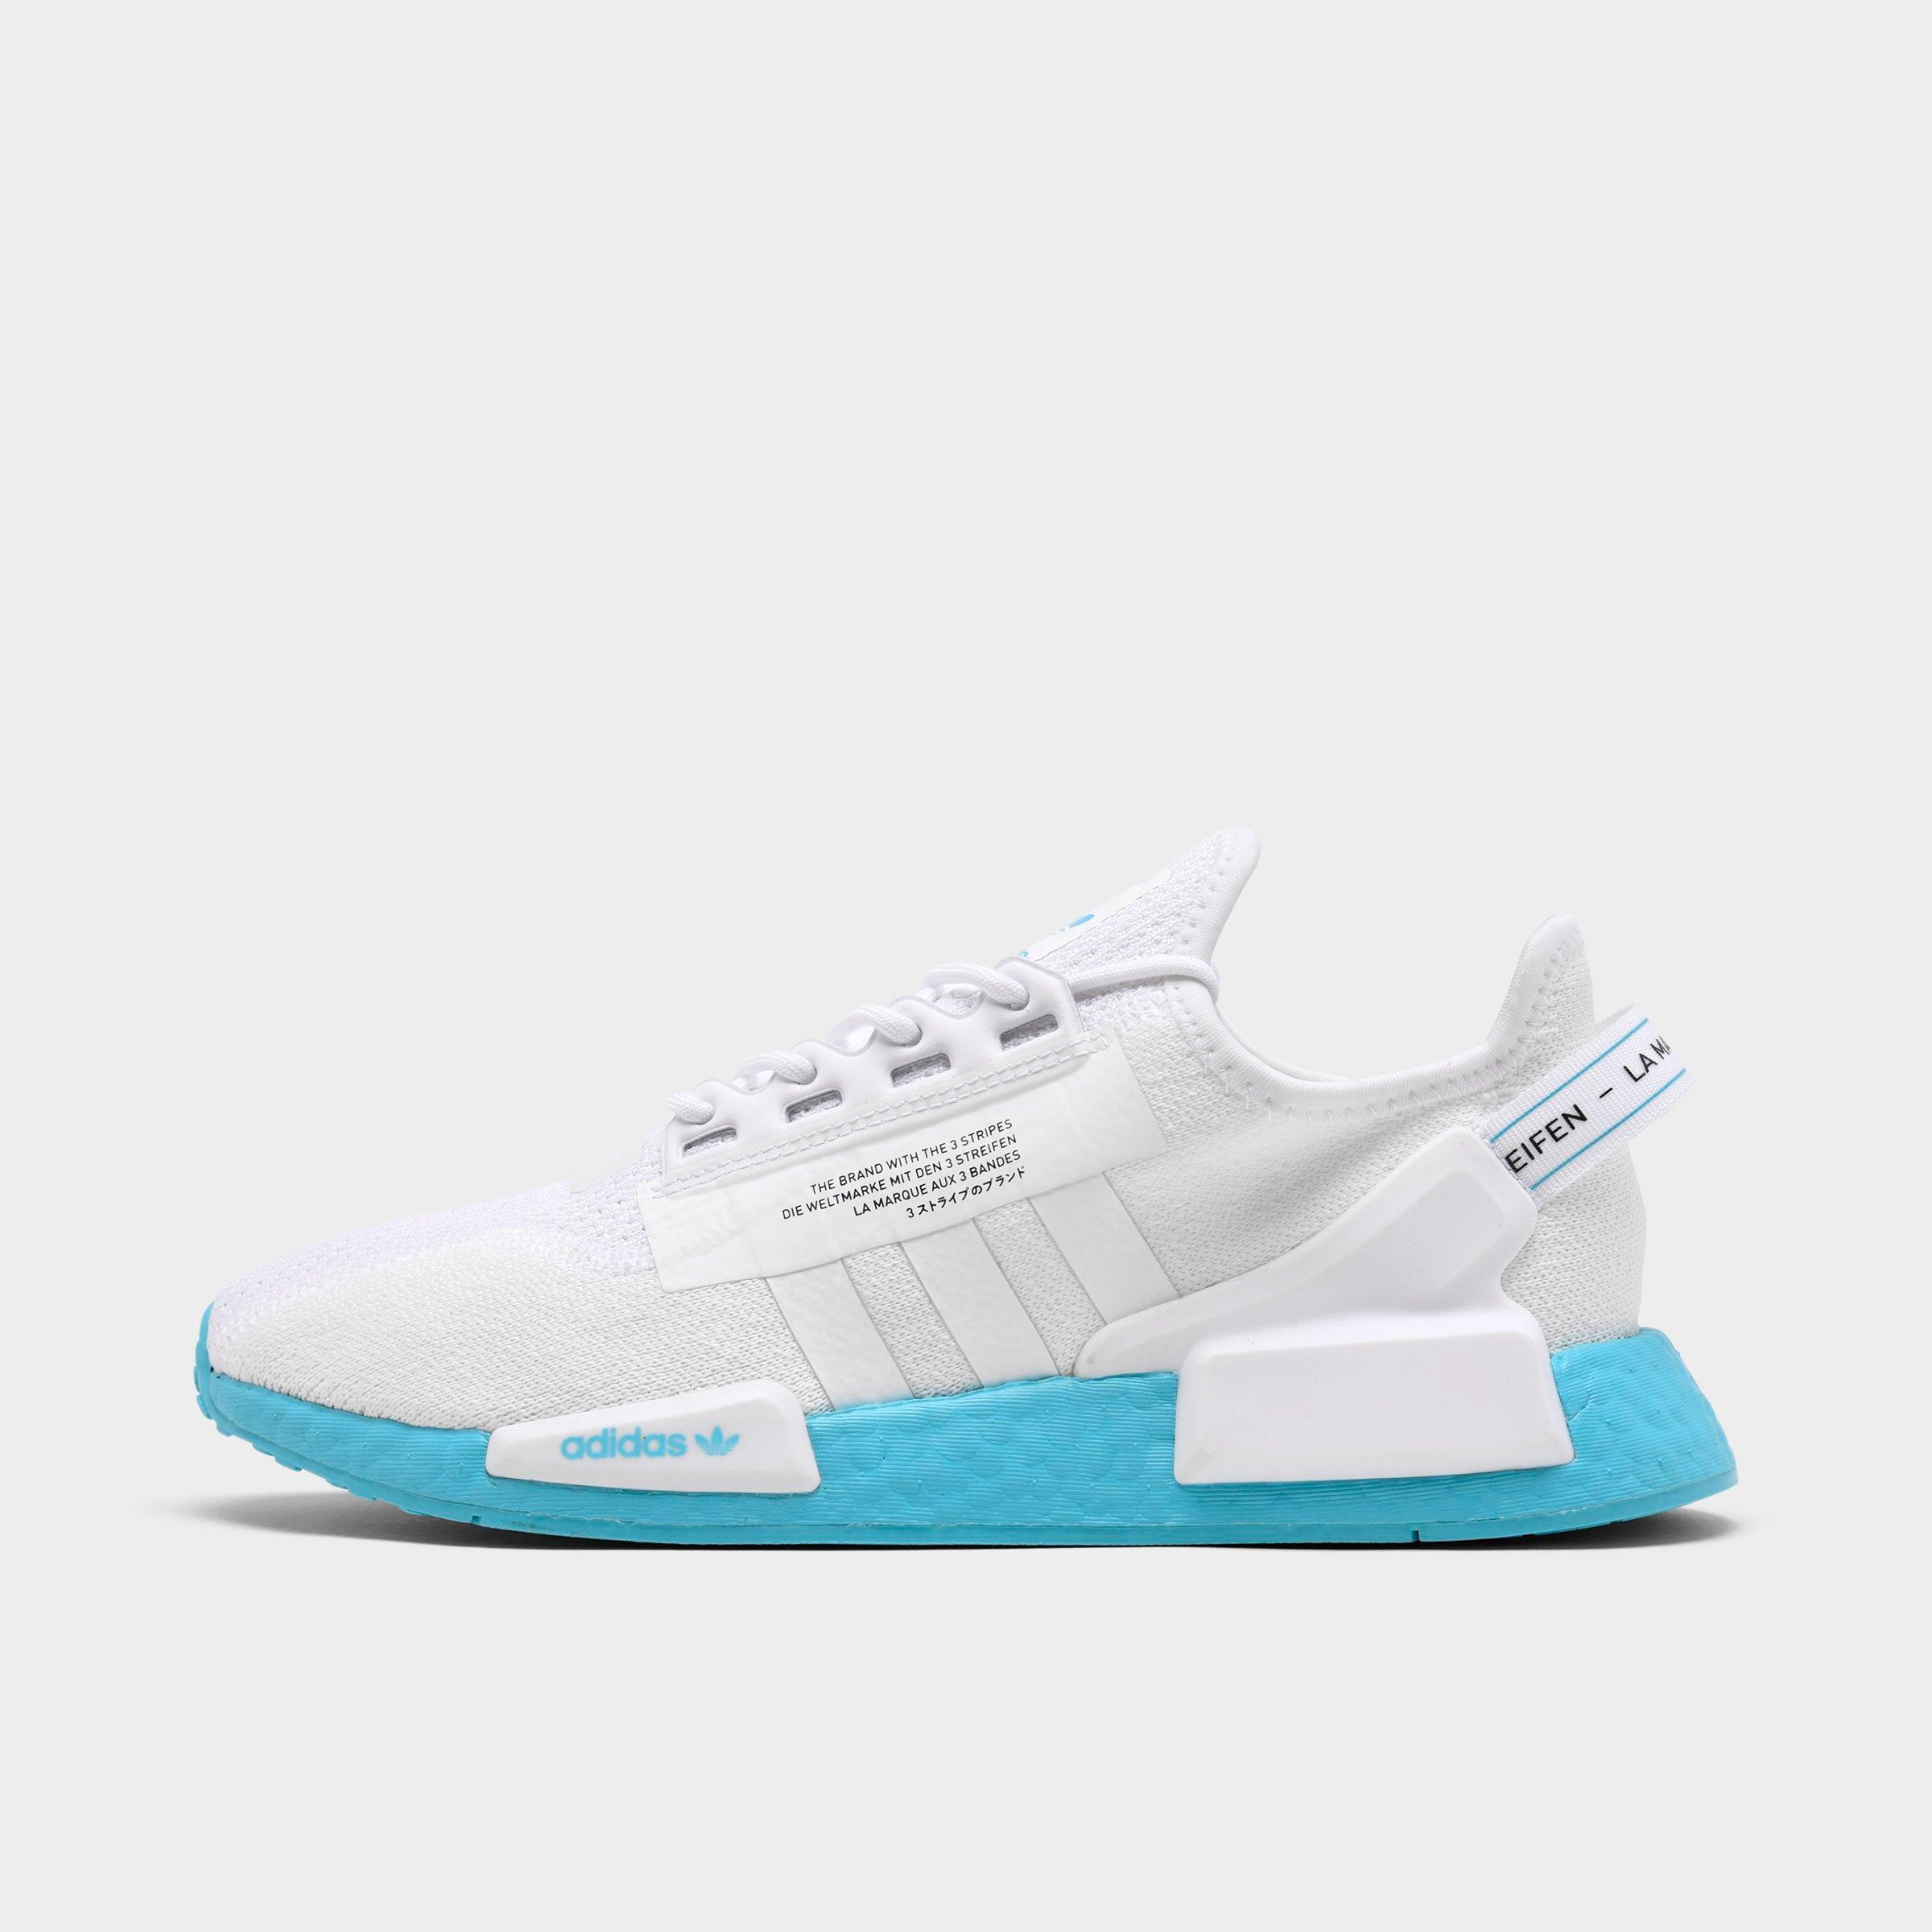 Adidas Nmd R1 Gray Womens freaky paydaycouk